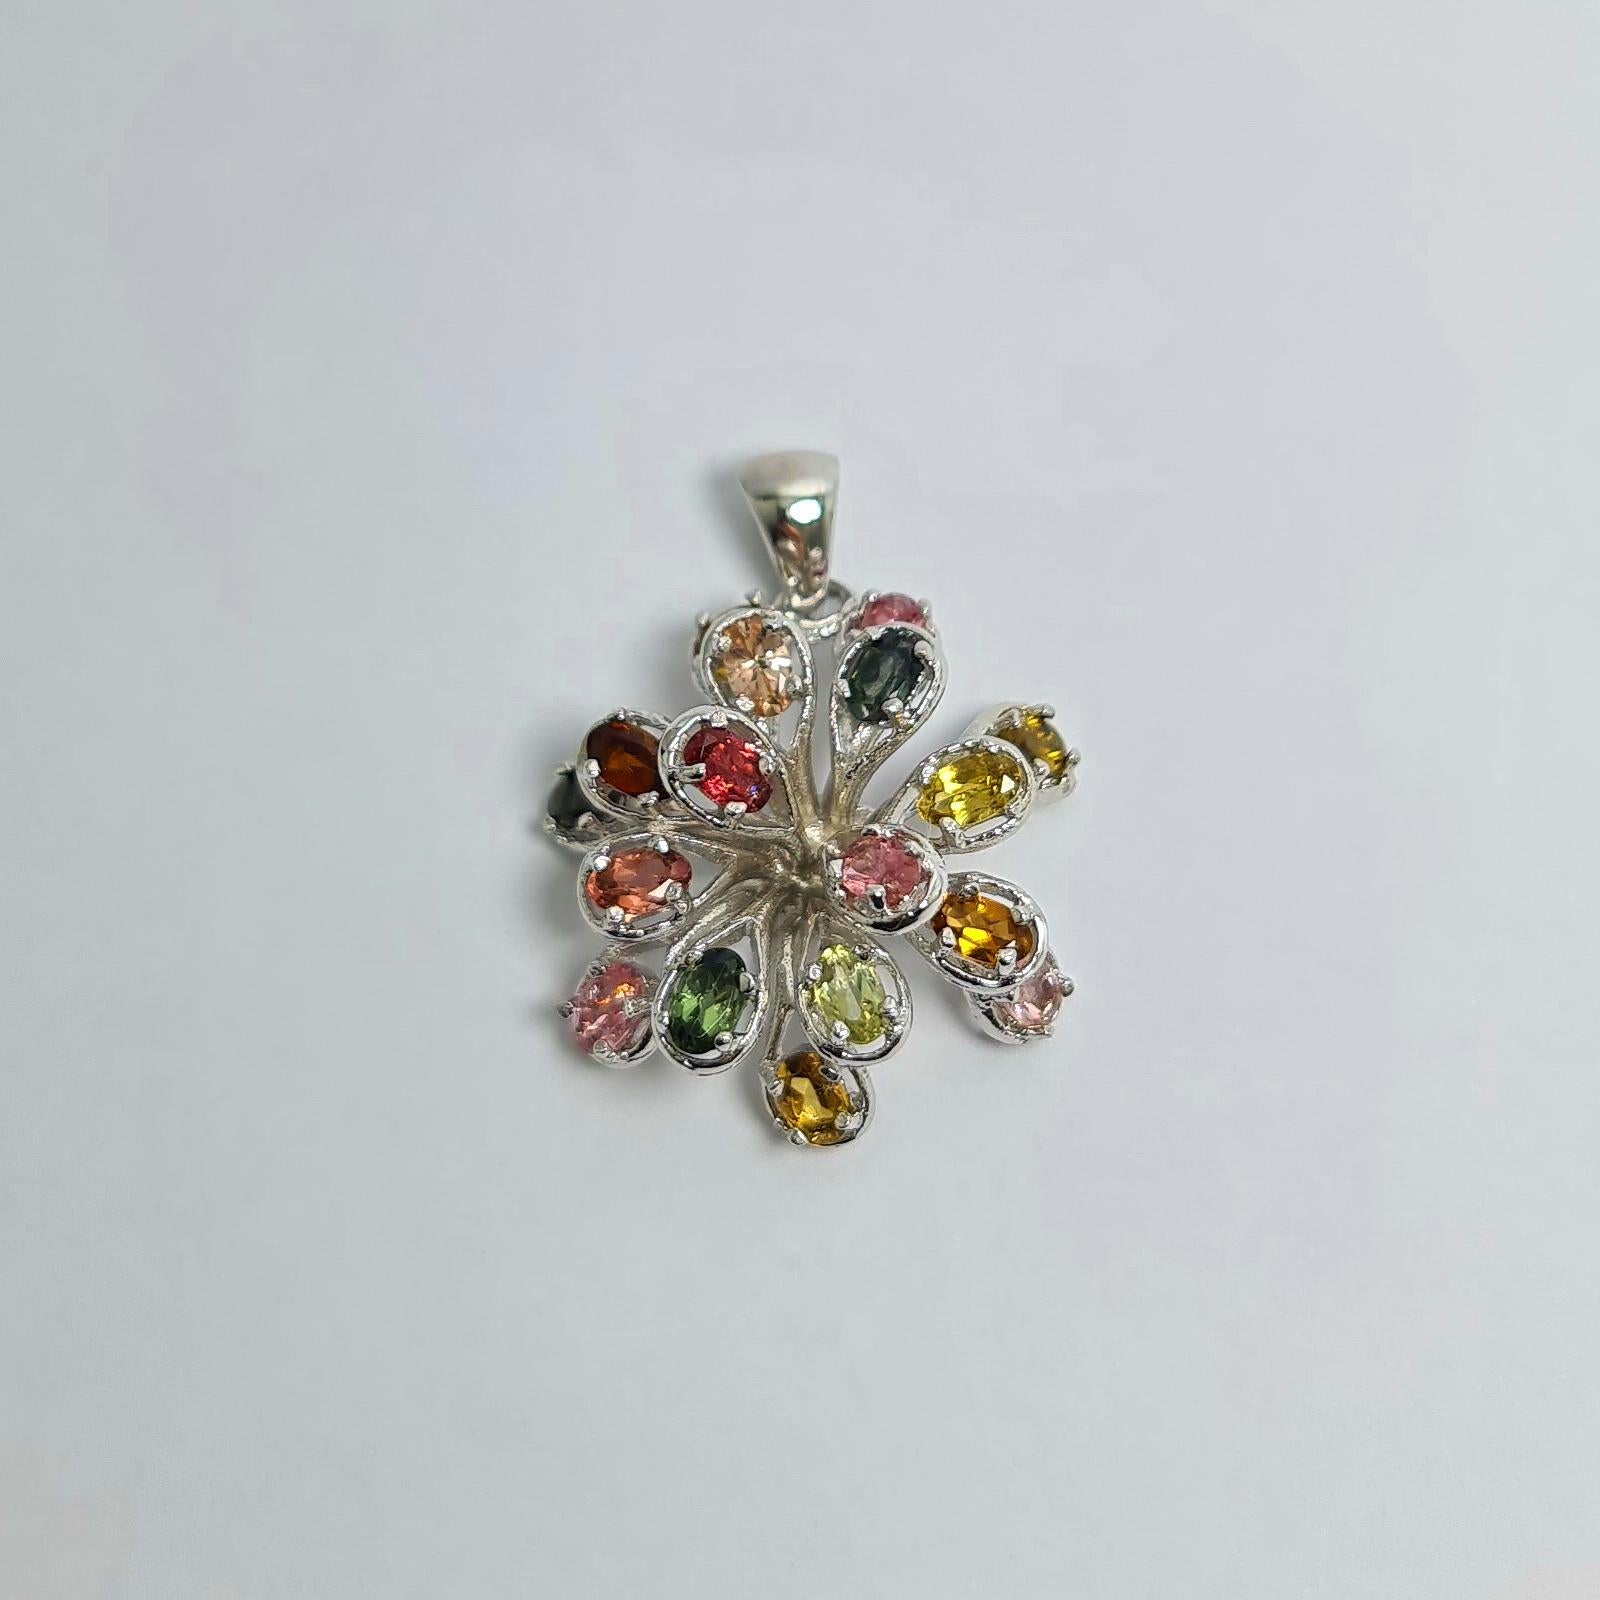 Natural Untreated Brazilian Multi Coloured Tourmaline Firework Burst Pure .925 Sterling Silver Rhodium Plated Pendant 

Total weight of Tourmalines: 7 carats
Total weight if the Pendant: 8.5 grams